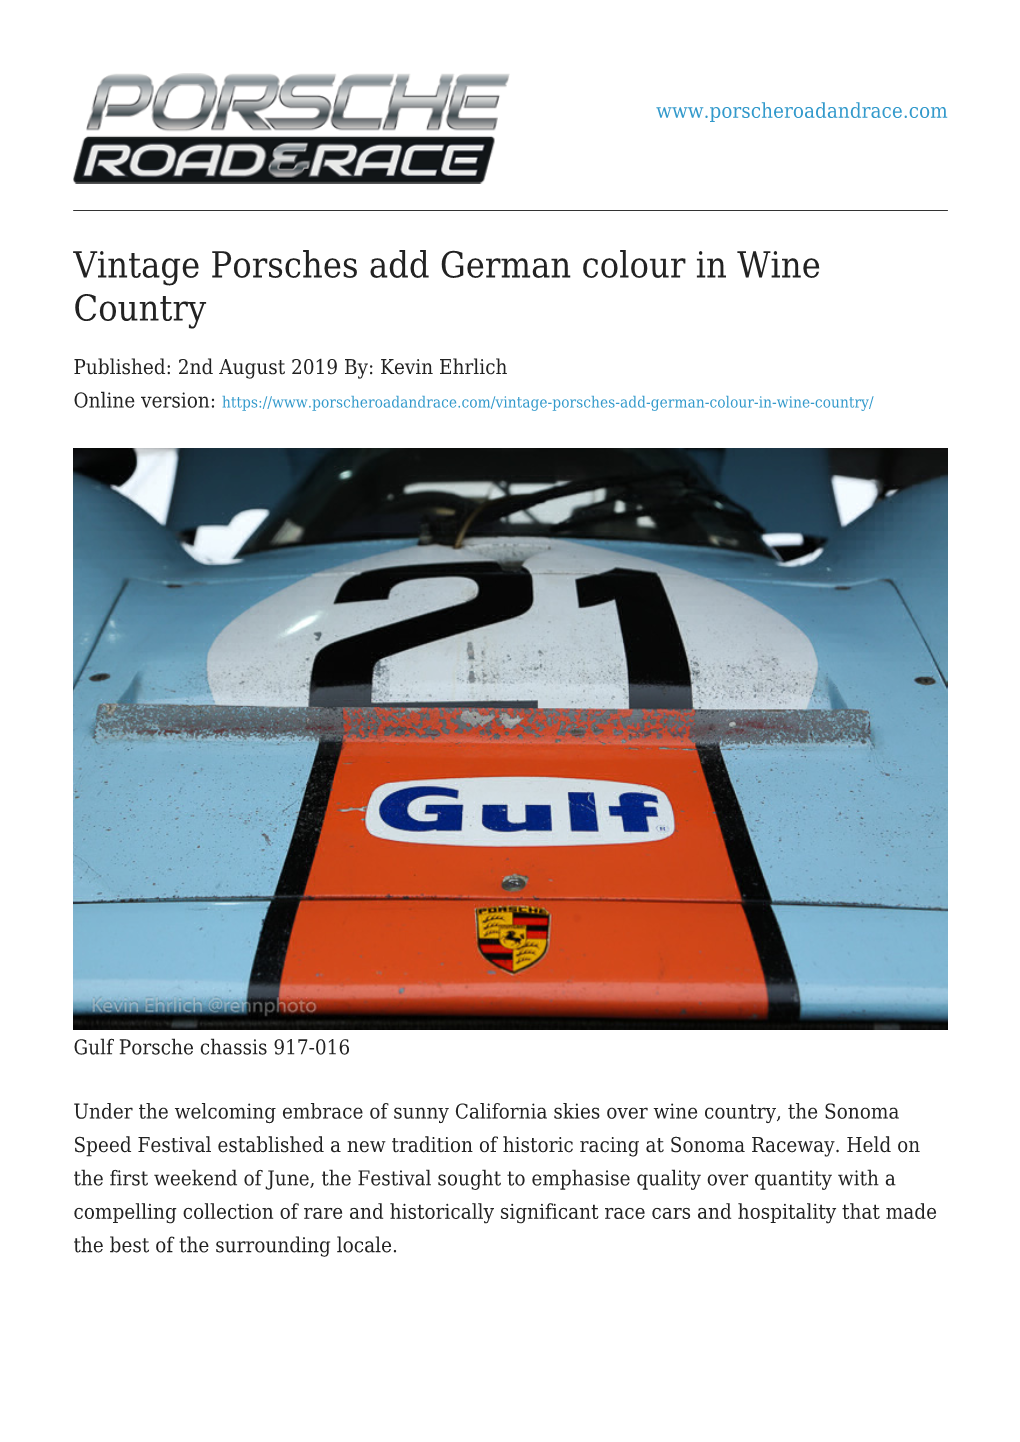 Vintage Porsches Add German Colour in Wine Country